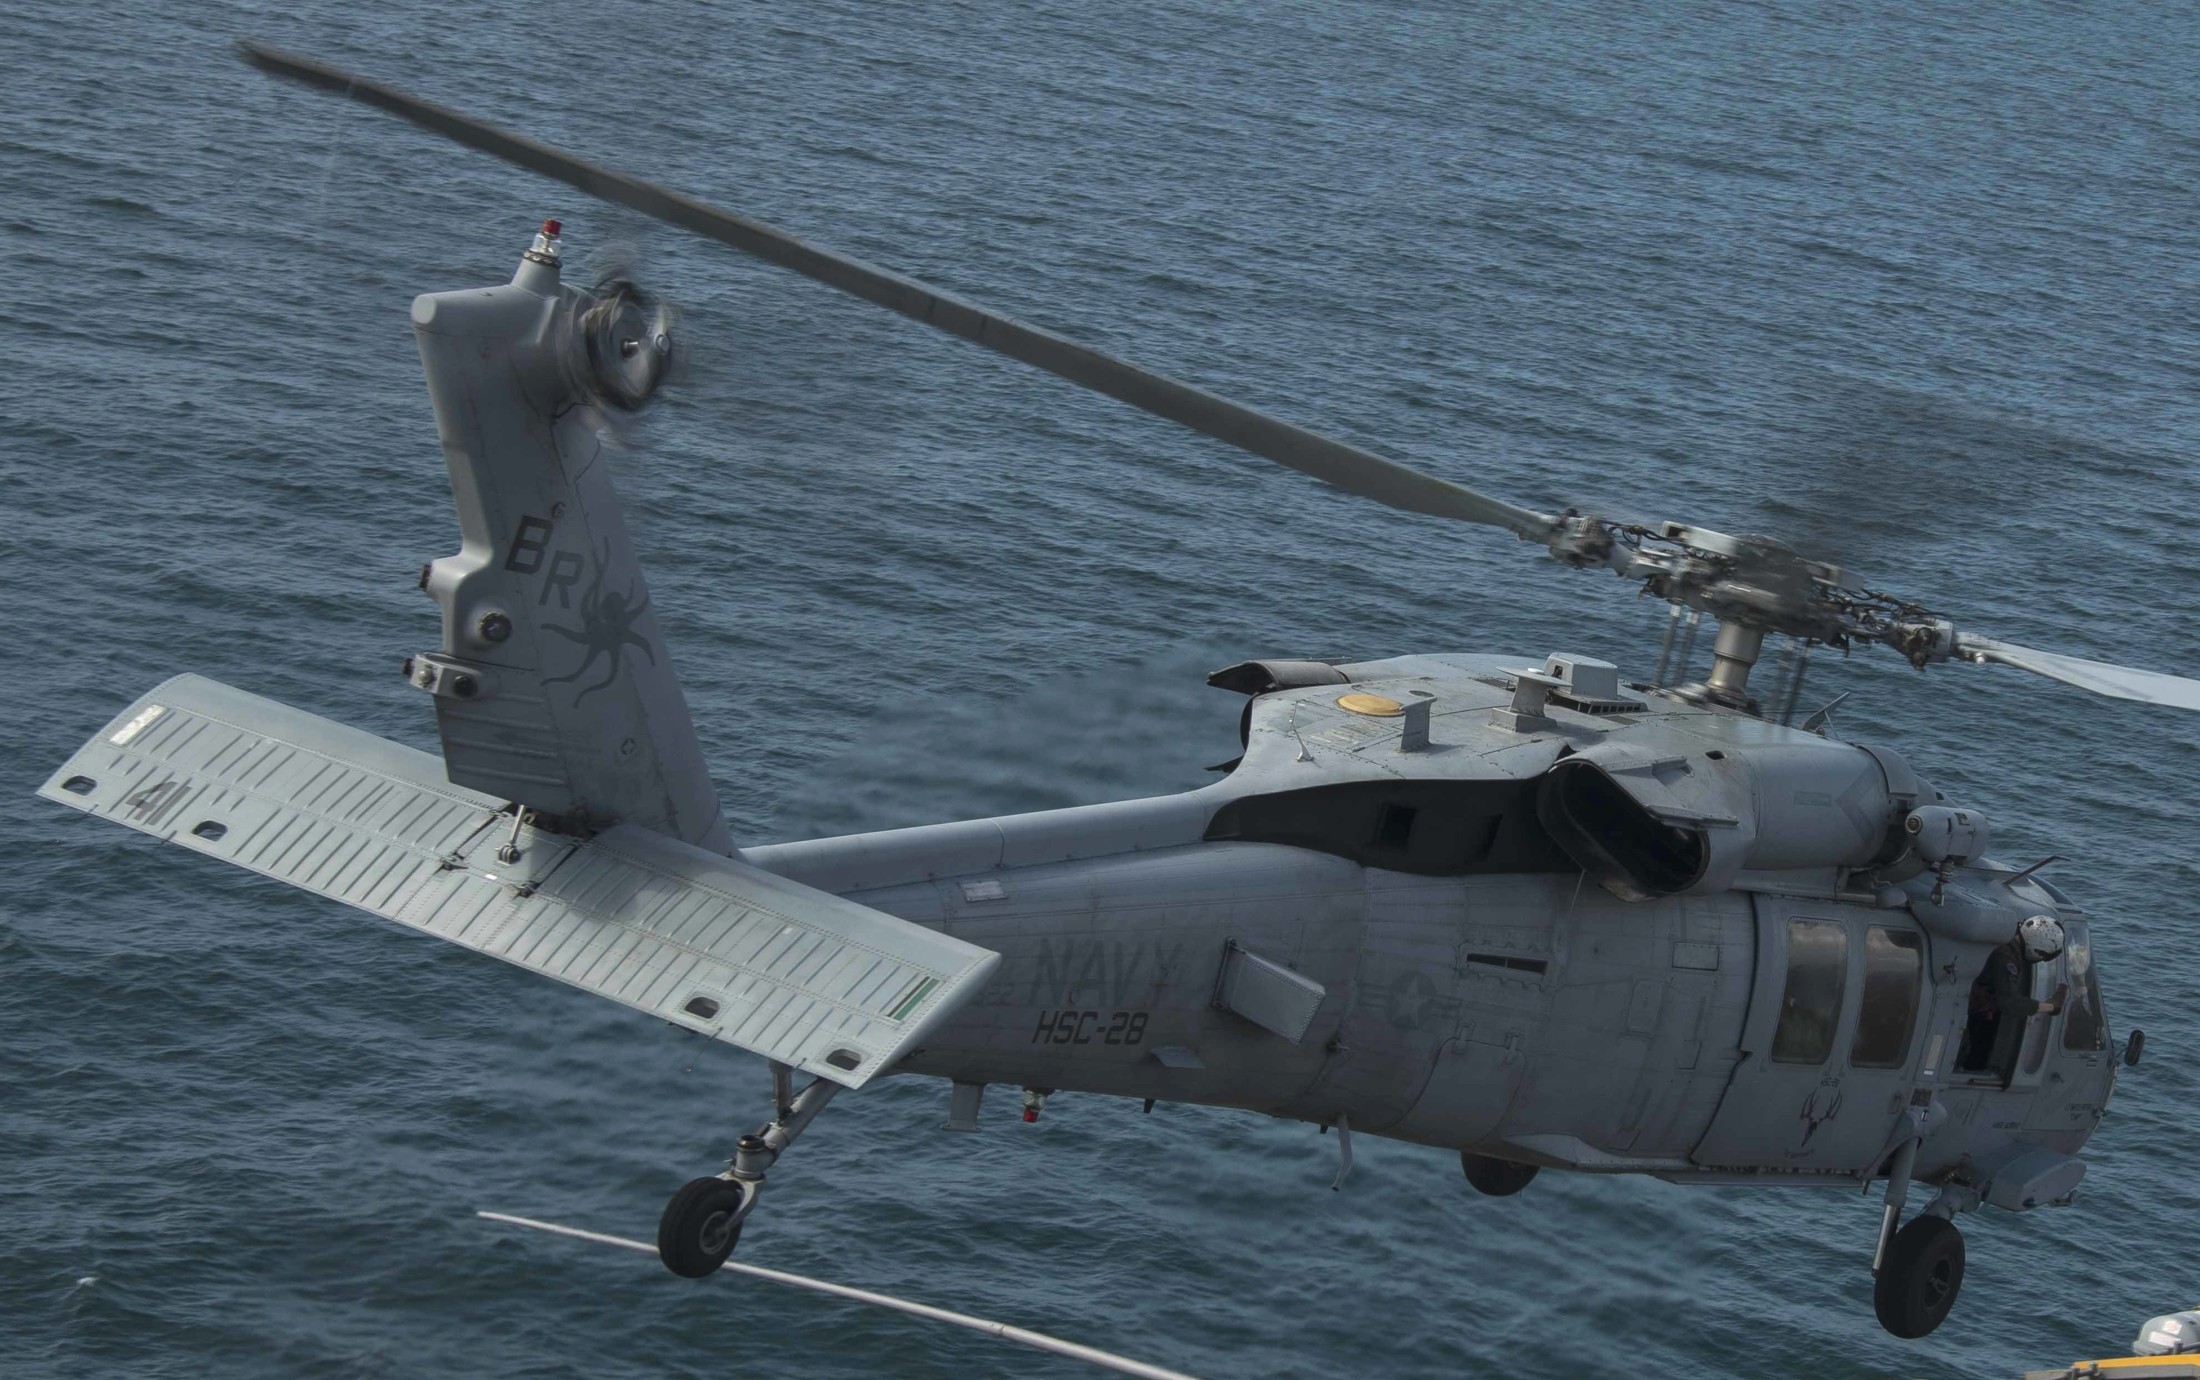 hsc-28 dragon whales helicopter sea combat squadron mh-60s seahawk us navy 199 uss iwo jima lhd-7